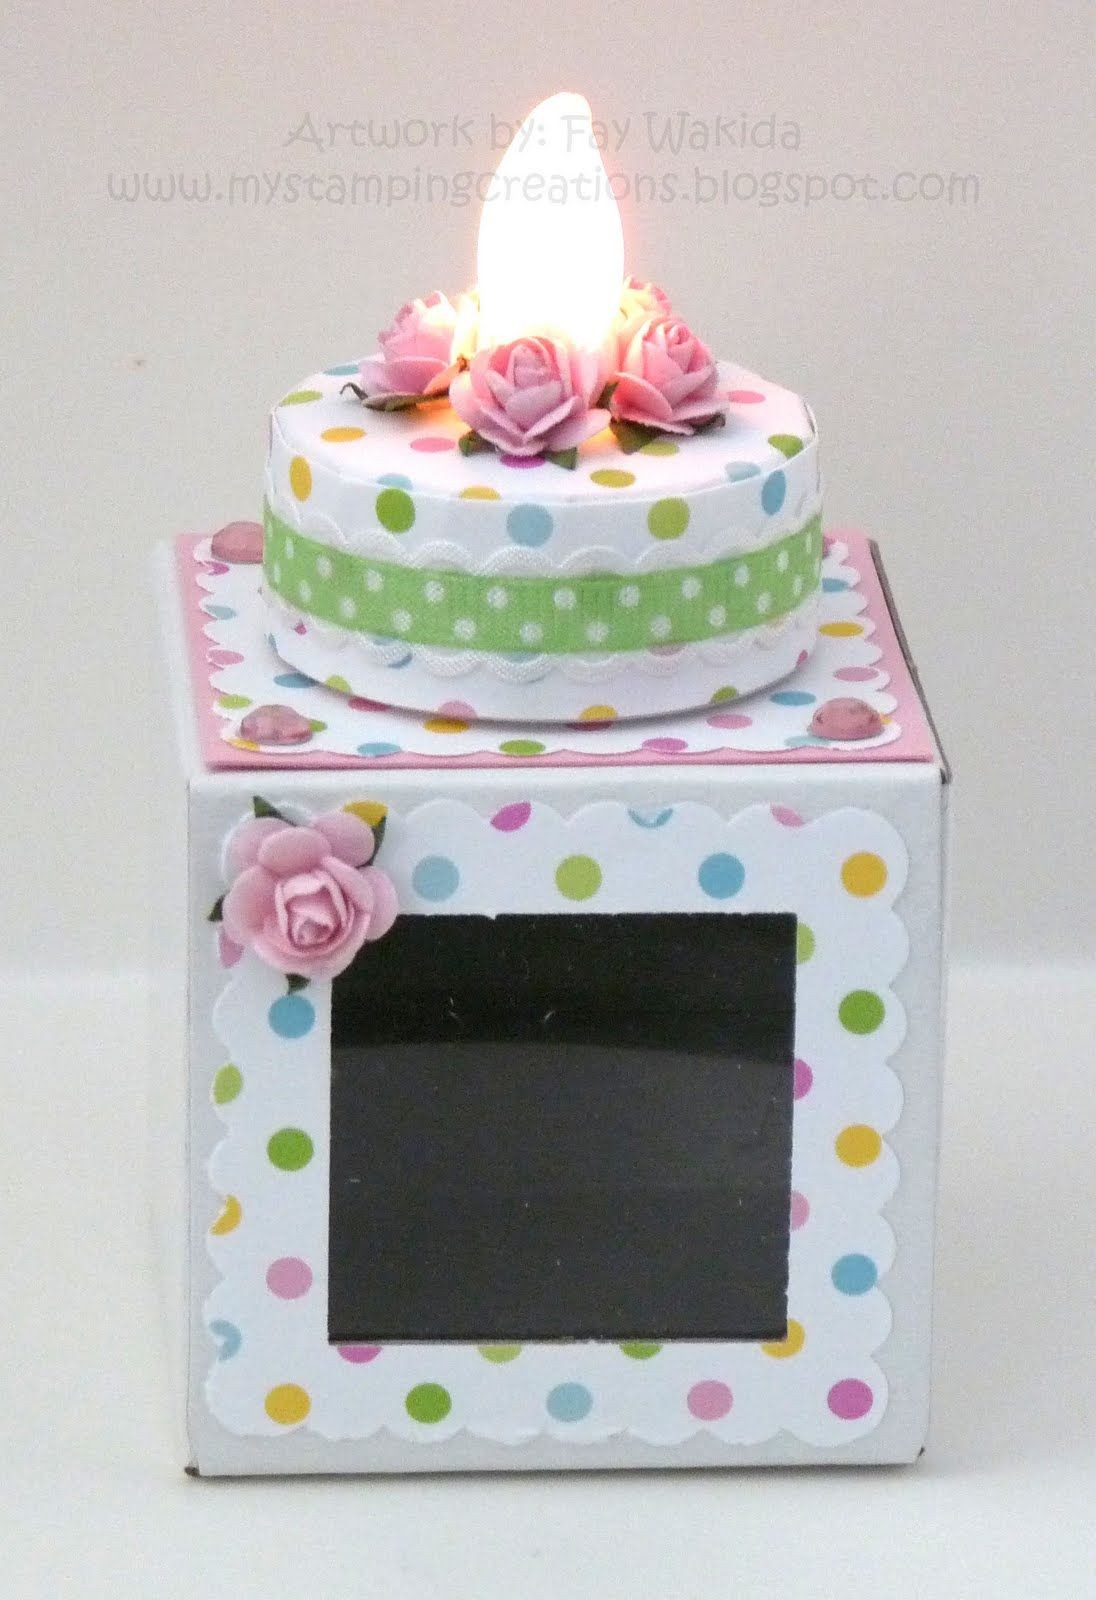 Cake Papercraft I Ve Been soooo Out Of the Crafting Mood I Hadn T Finished Any